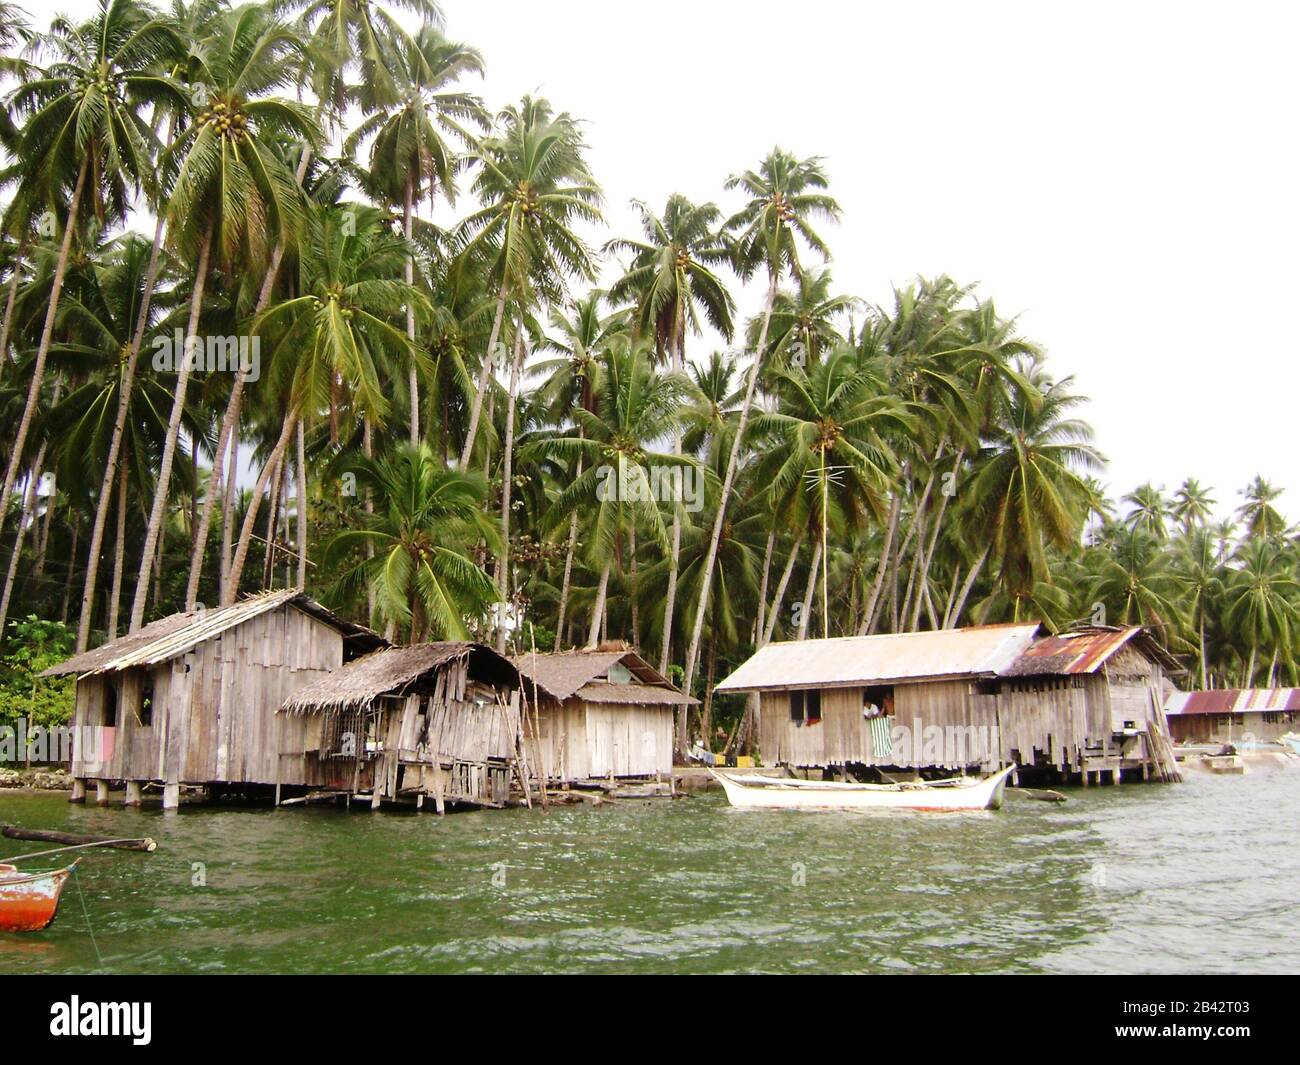 Fishing village with  houses on stilts along coconut groves in Surigao del Sur, Philippines Stock Photo